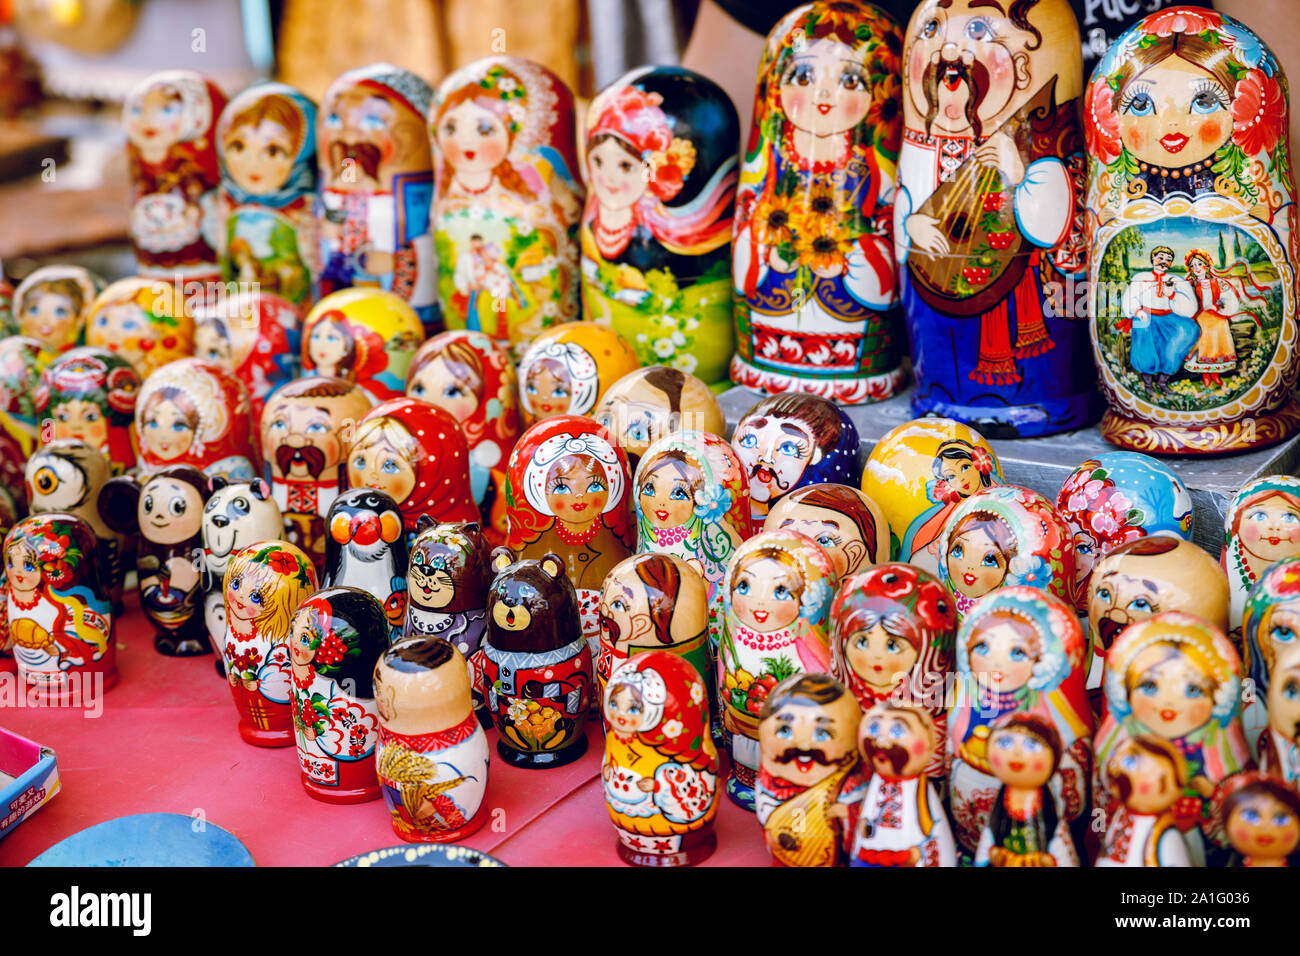 Wooden Nesting Dolls or Russian Matryoshka Dolls for sale in St Petersburg, Russia Stock Photo